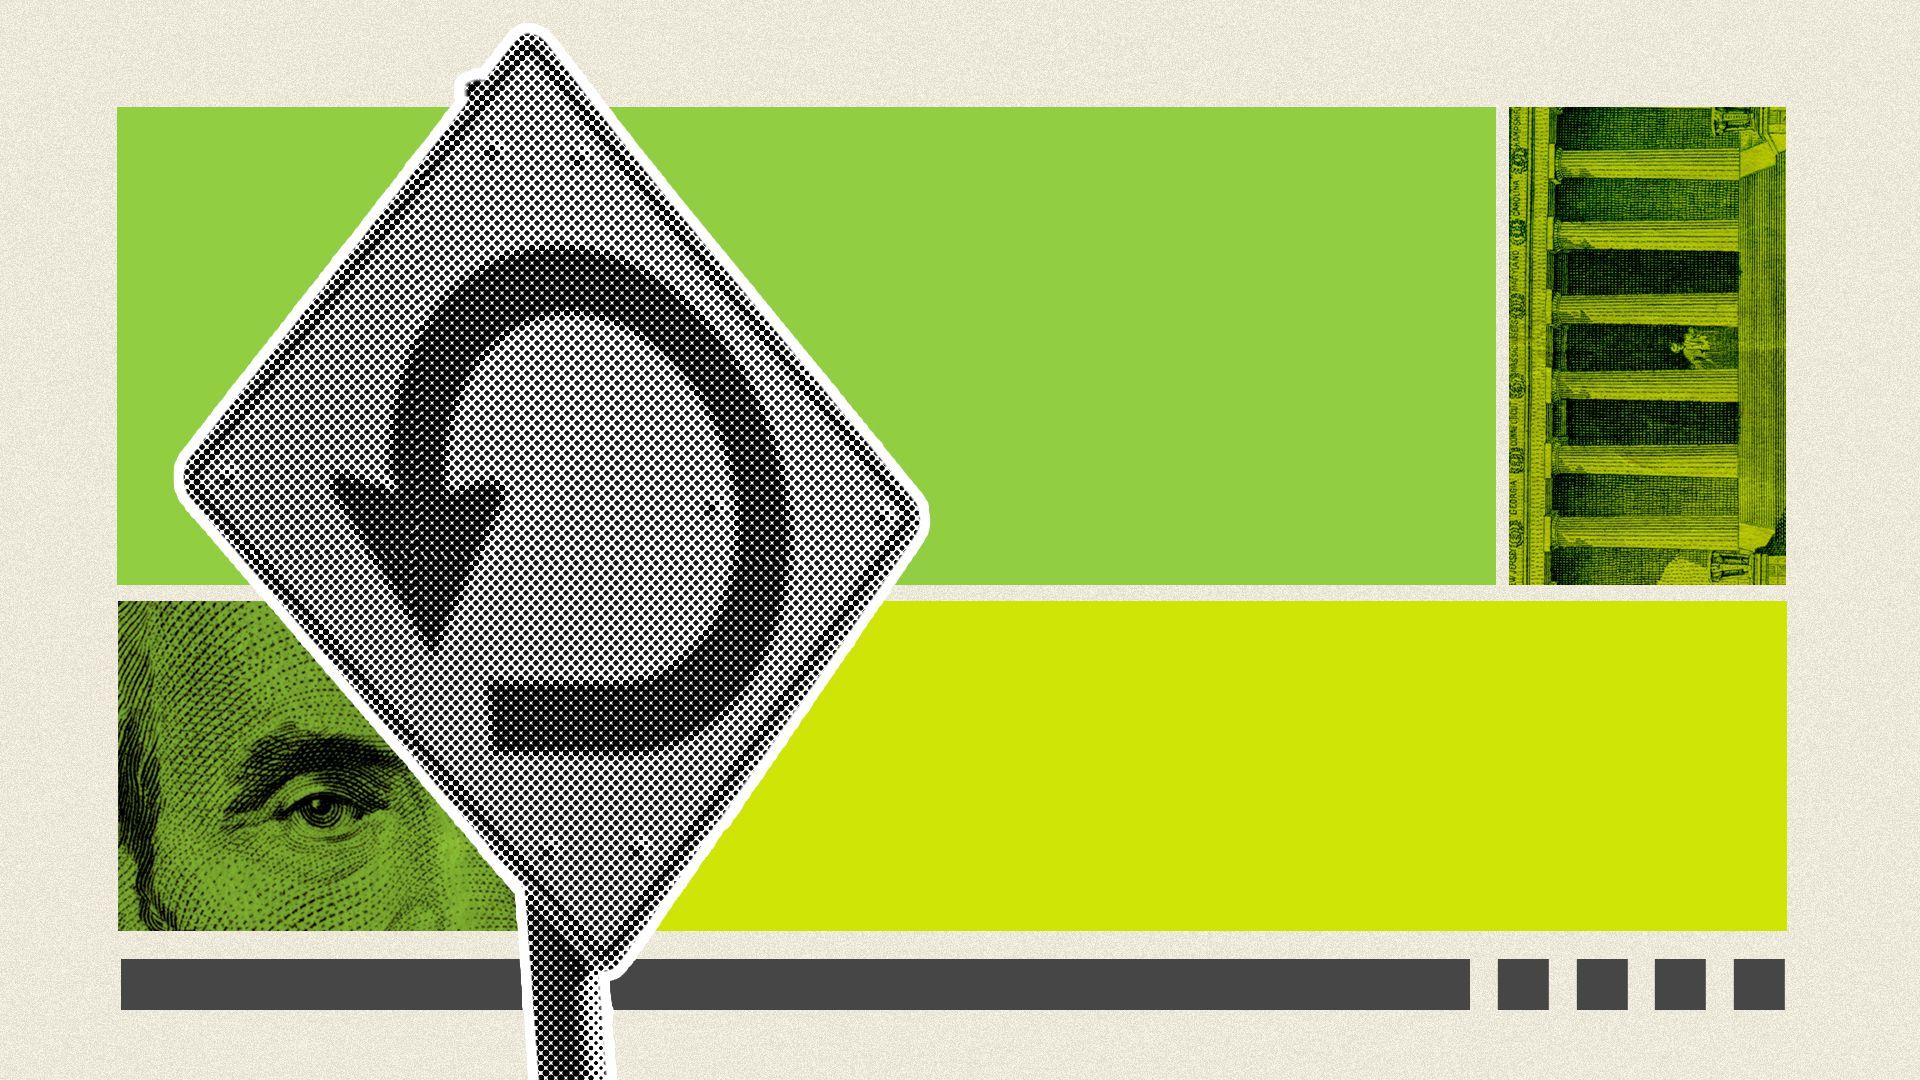 Illustration of a u-turn sign with money and geometric shapes around it